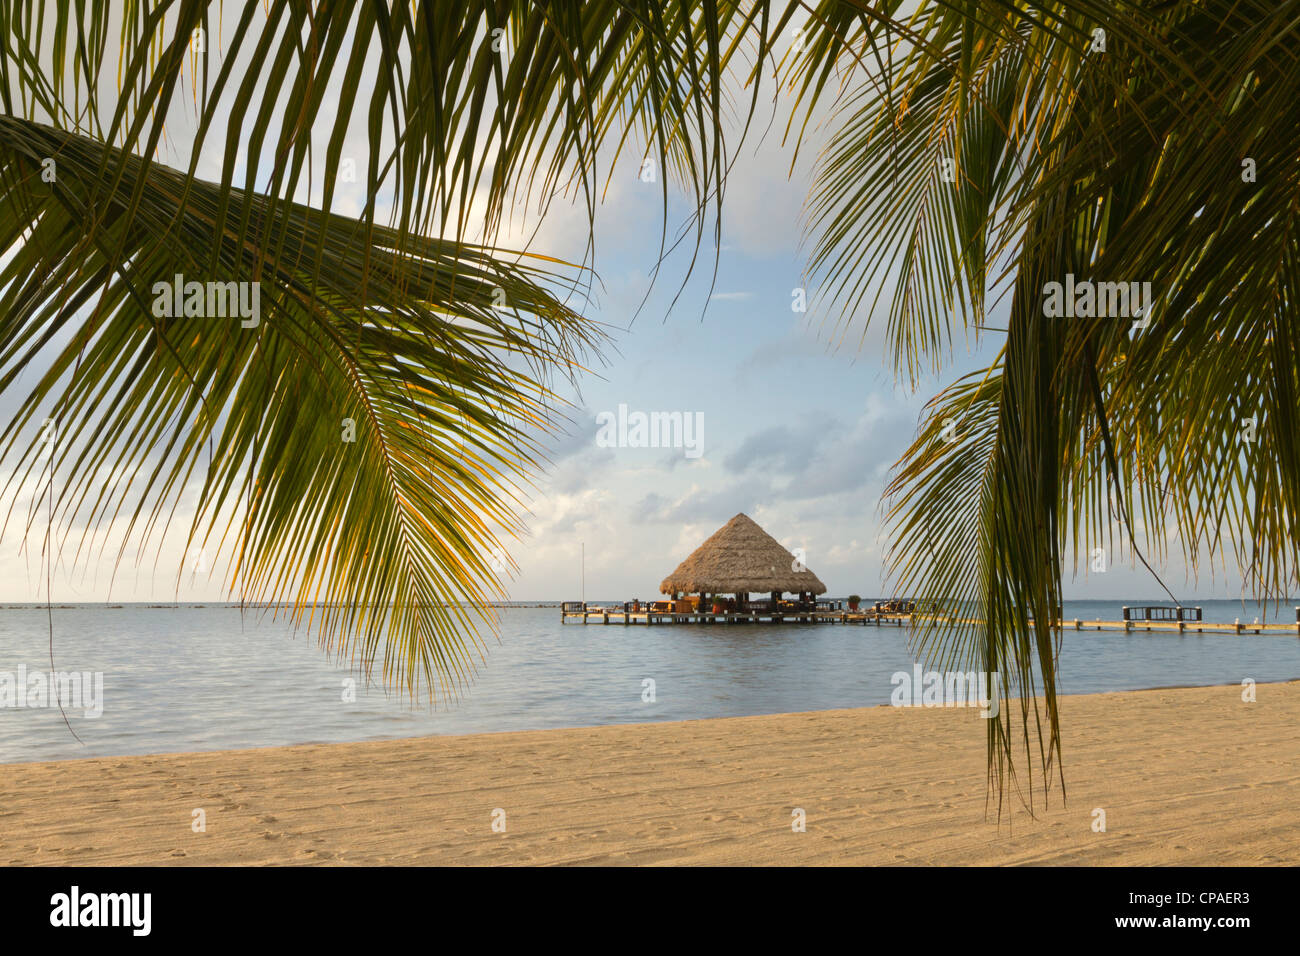 A palapa and sandy beach, Placencia, Belize Stock Photo